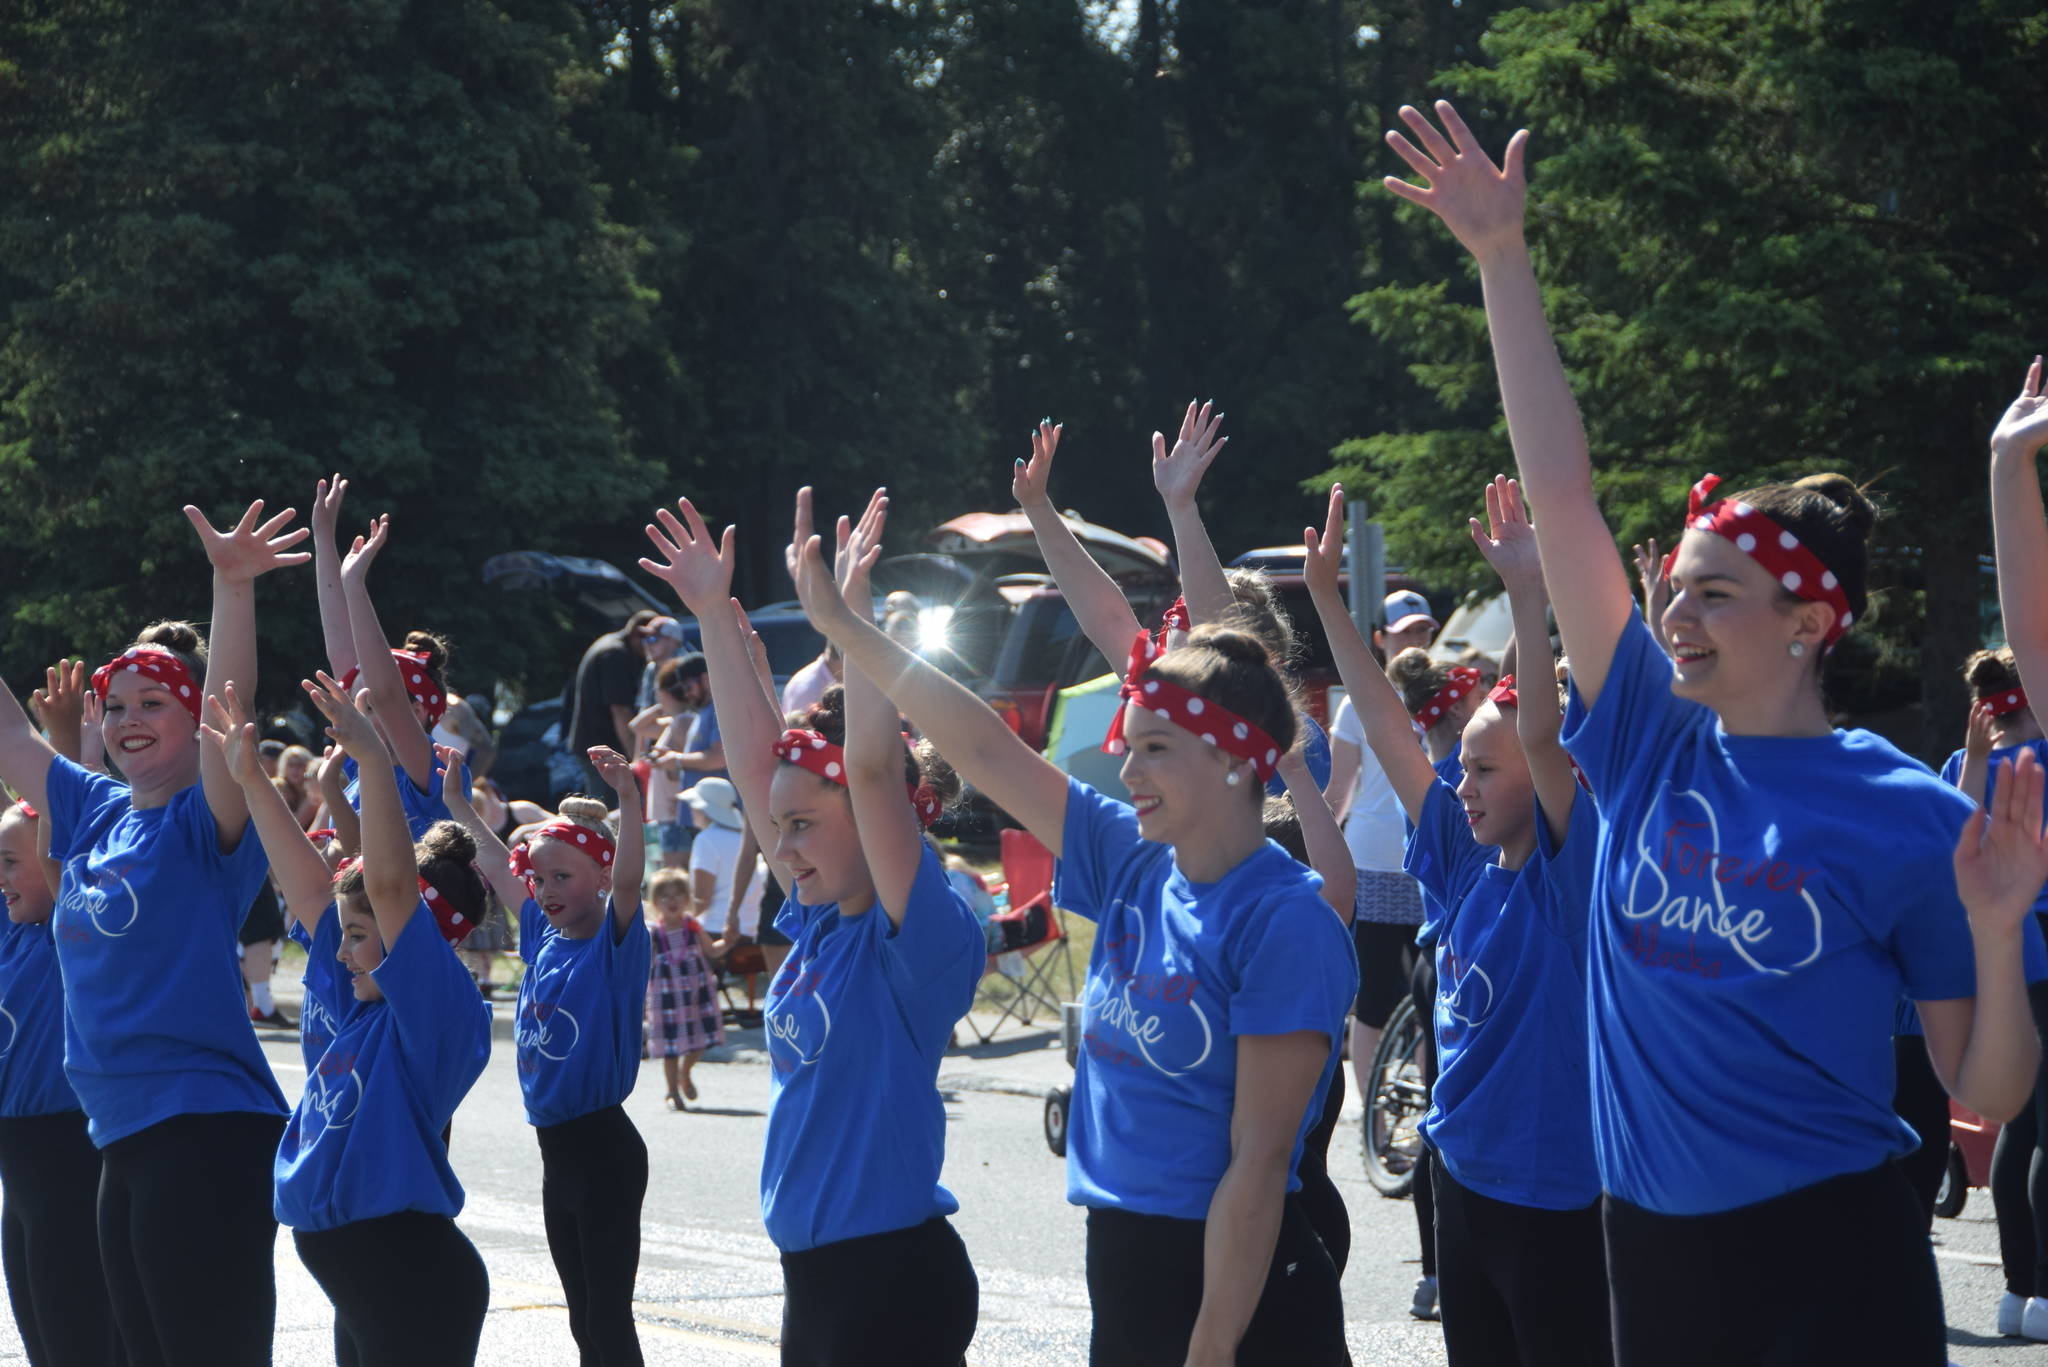 Forever Dance Alaska performs for the crowd during the July 4th parade in Kenai, Alaska. (Photo by Brian Mazurek/Peninsula Clarion)